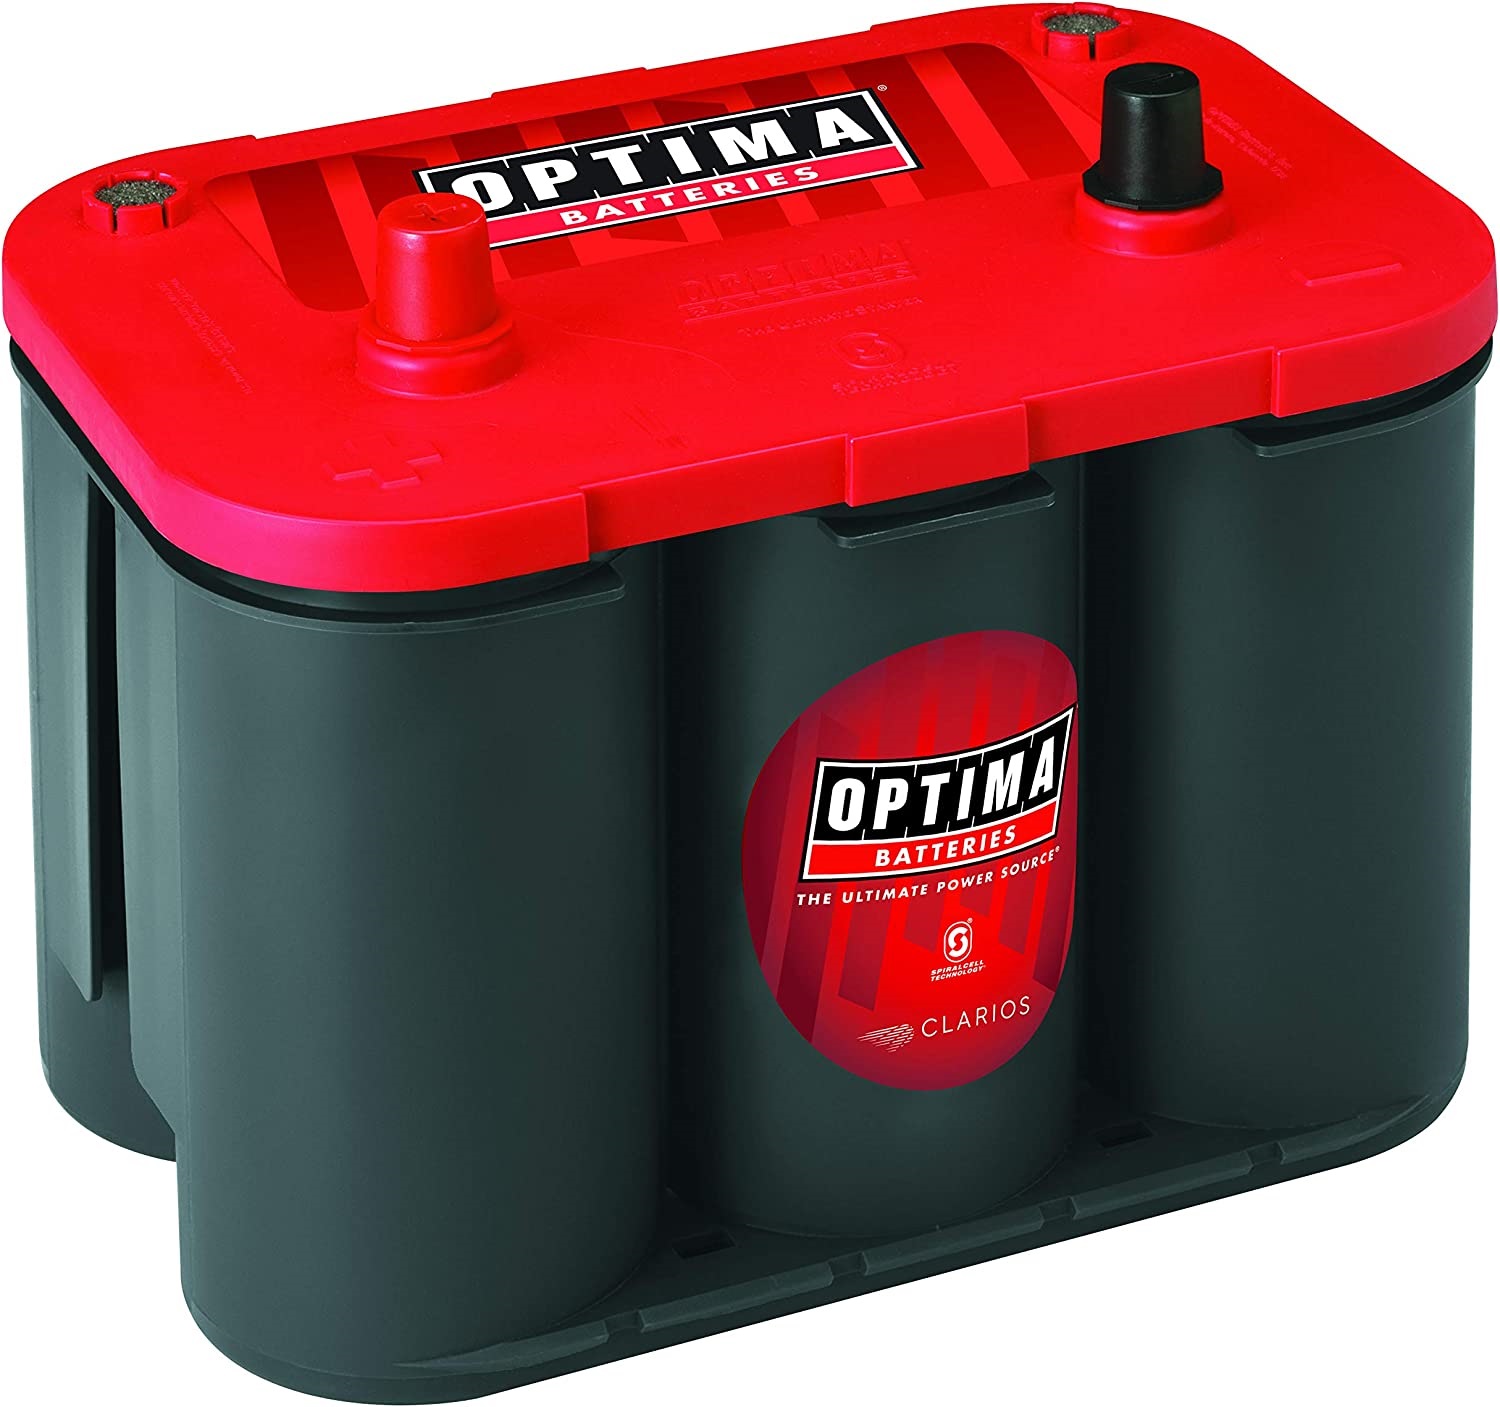 Optima Batteries REDTOP Battery Group 34 800 CCA Top Post - 8002-002 replaces 4WP OPT8002-002 4